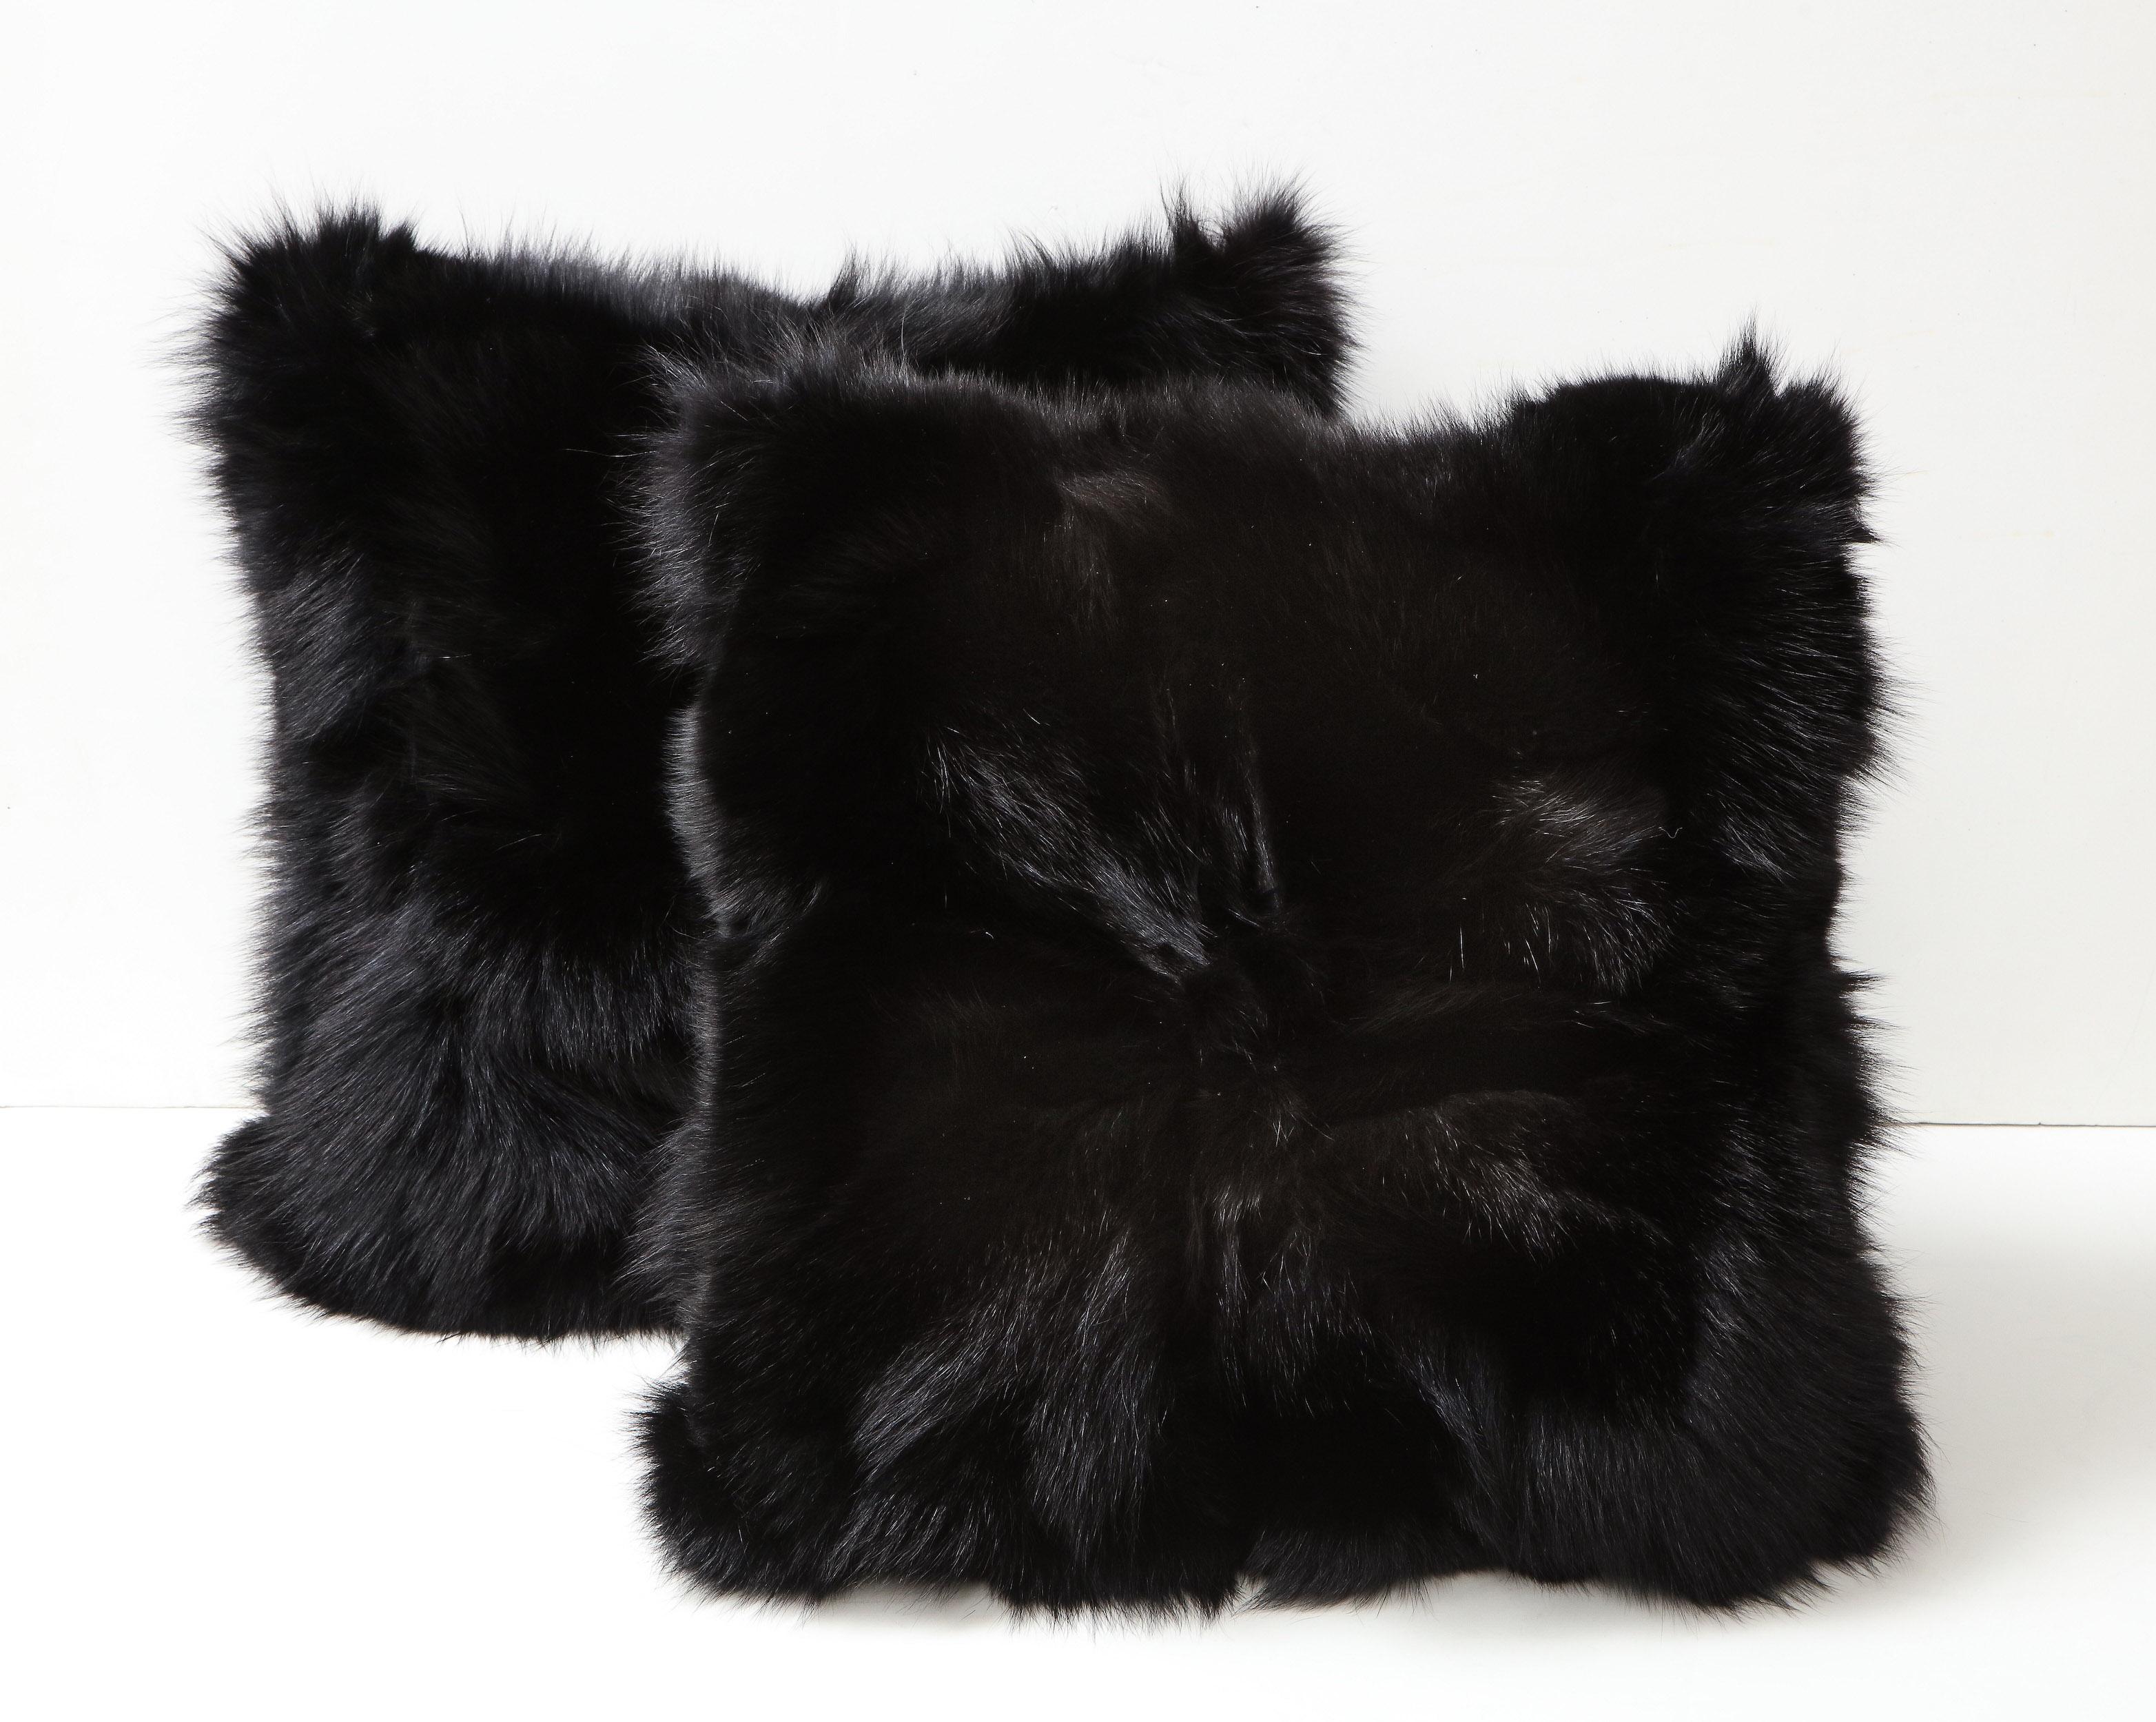 Modern Double Sided Toscana Shearling Pillow in Black Color